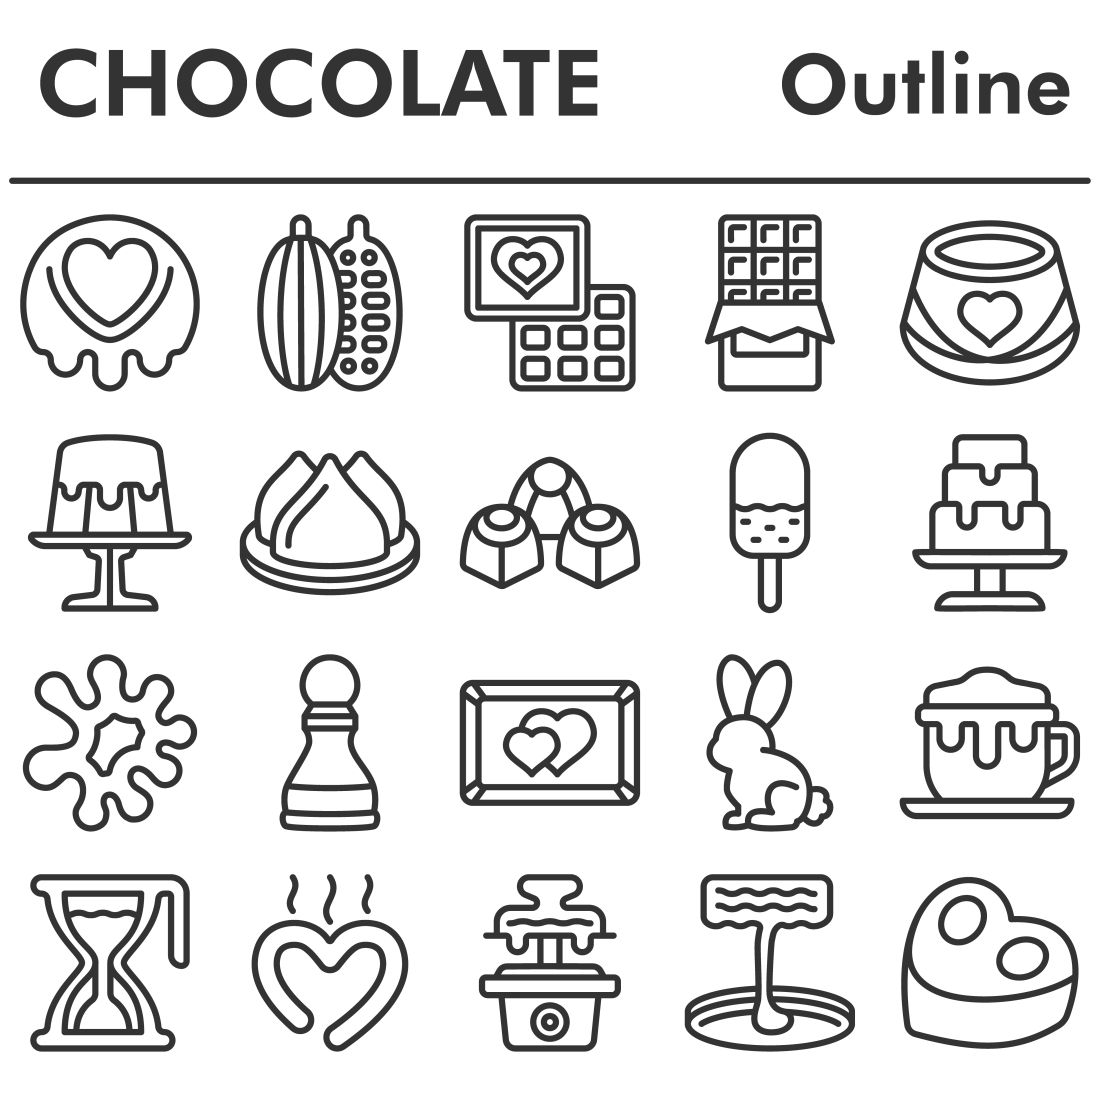 Chocolate icons set, outline style cover image.